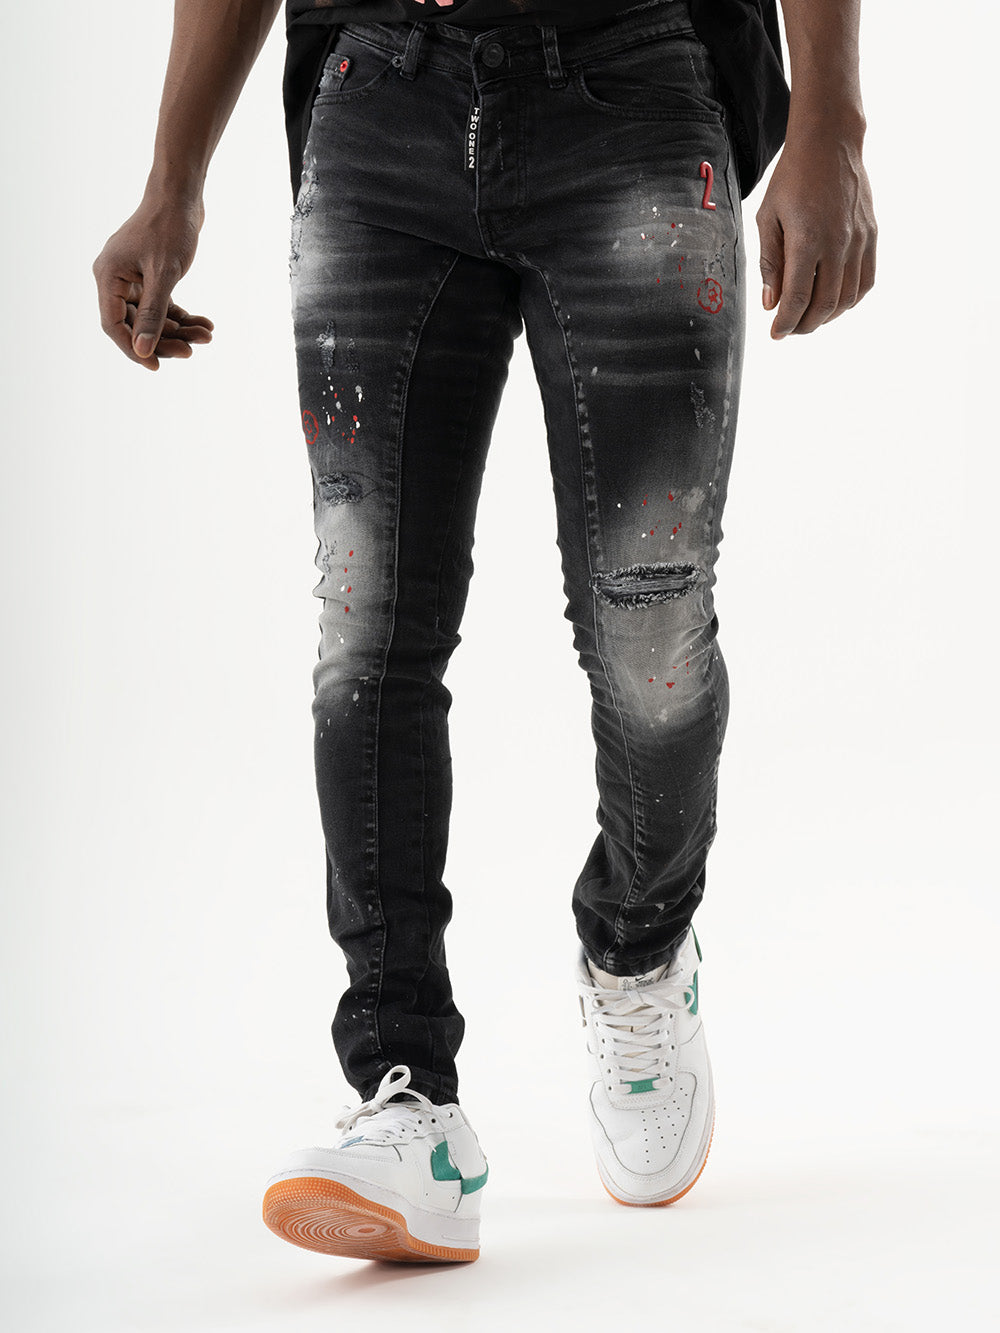 A man wearing ripped black THUNDERBIRD jeans with added stretch and sneakers.